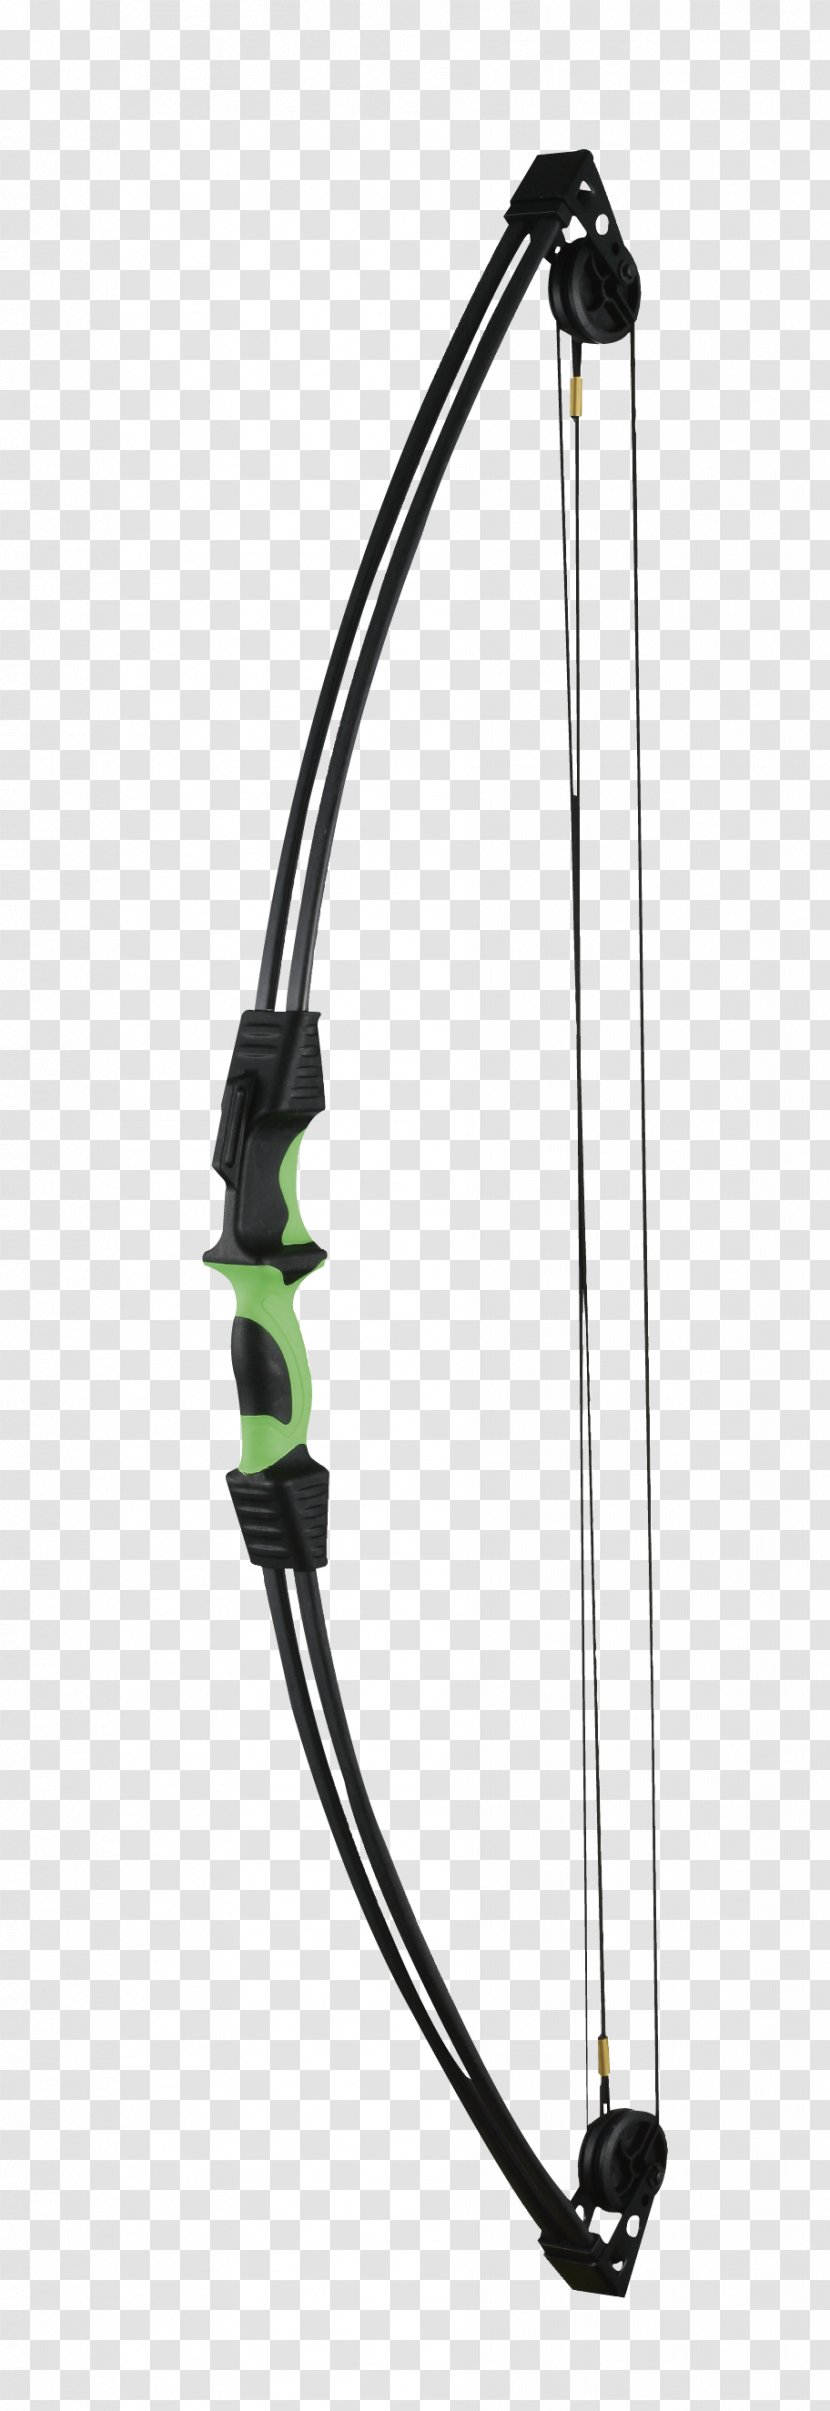 Compound Bows Arrow Modern Competitive Archery - Crossbow - Bow Transparent PNG